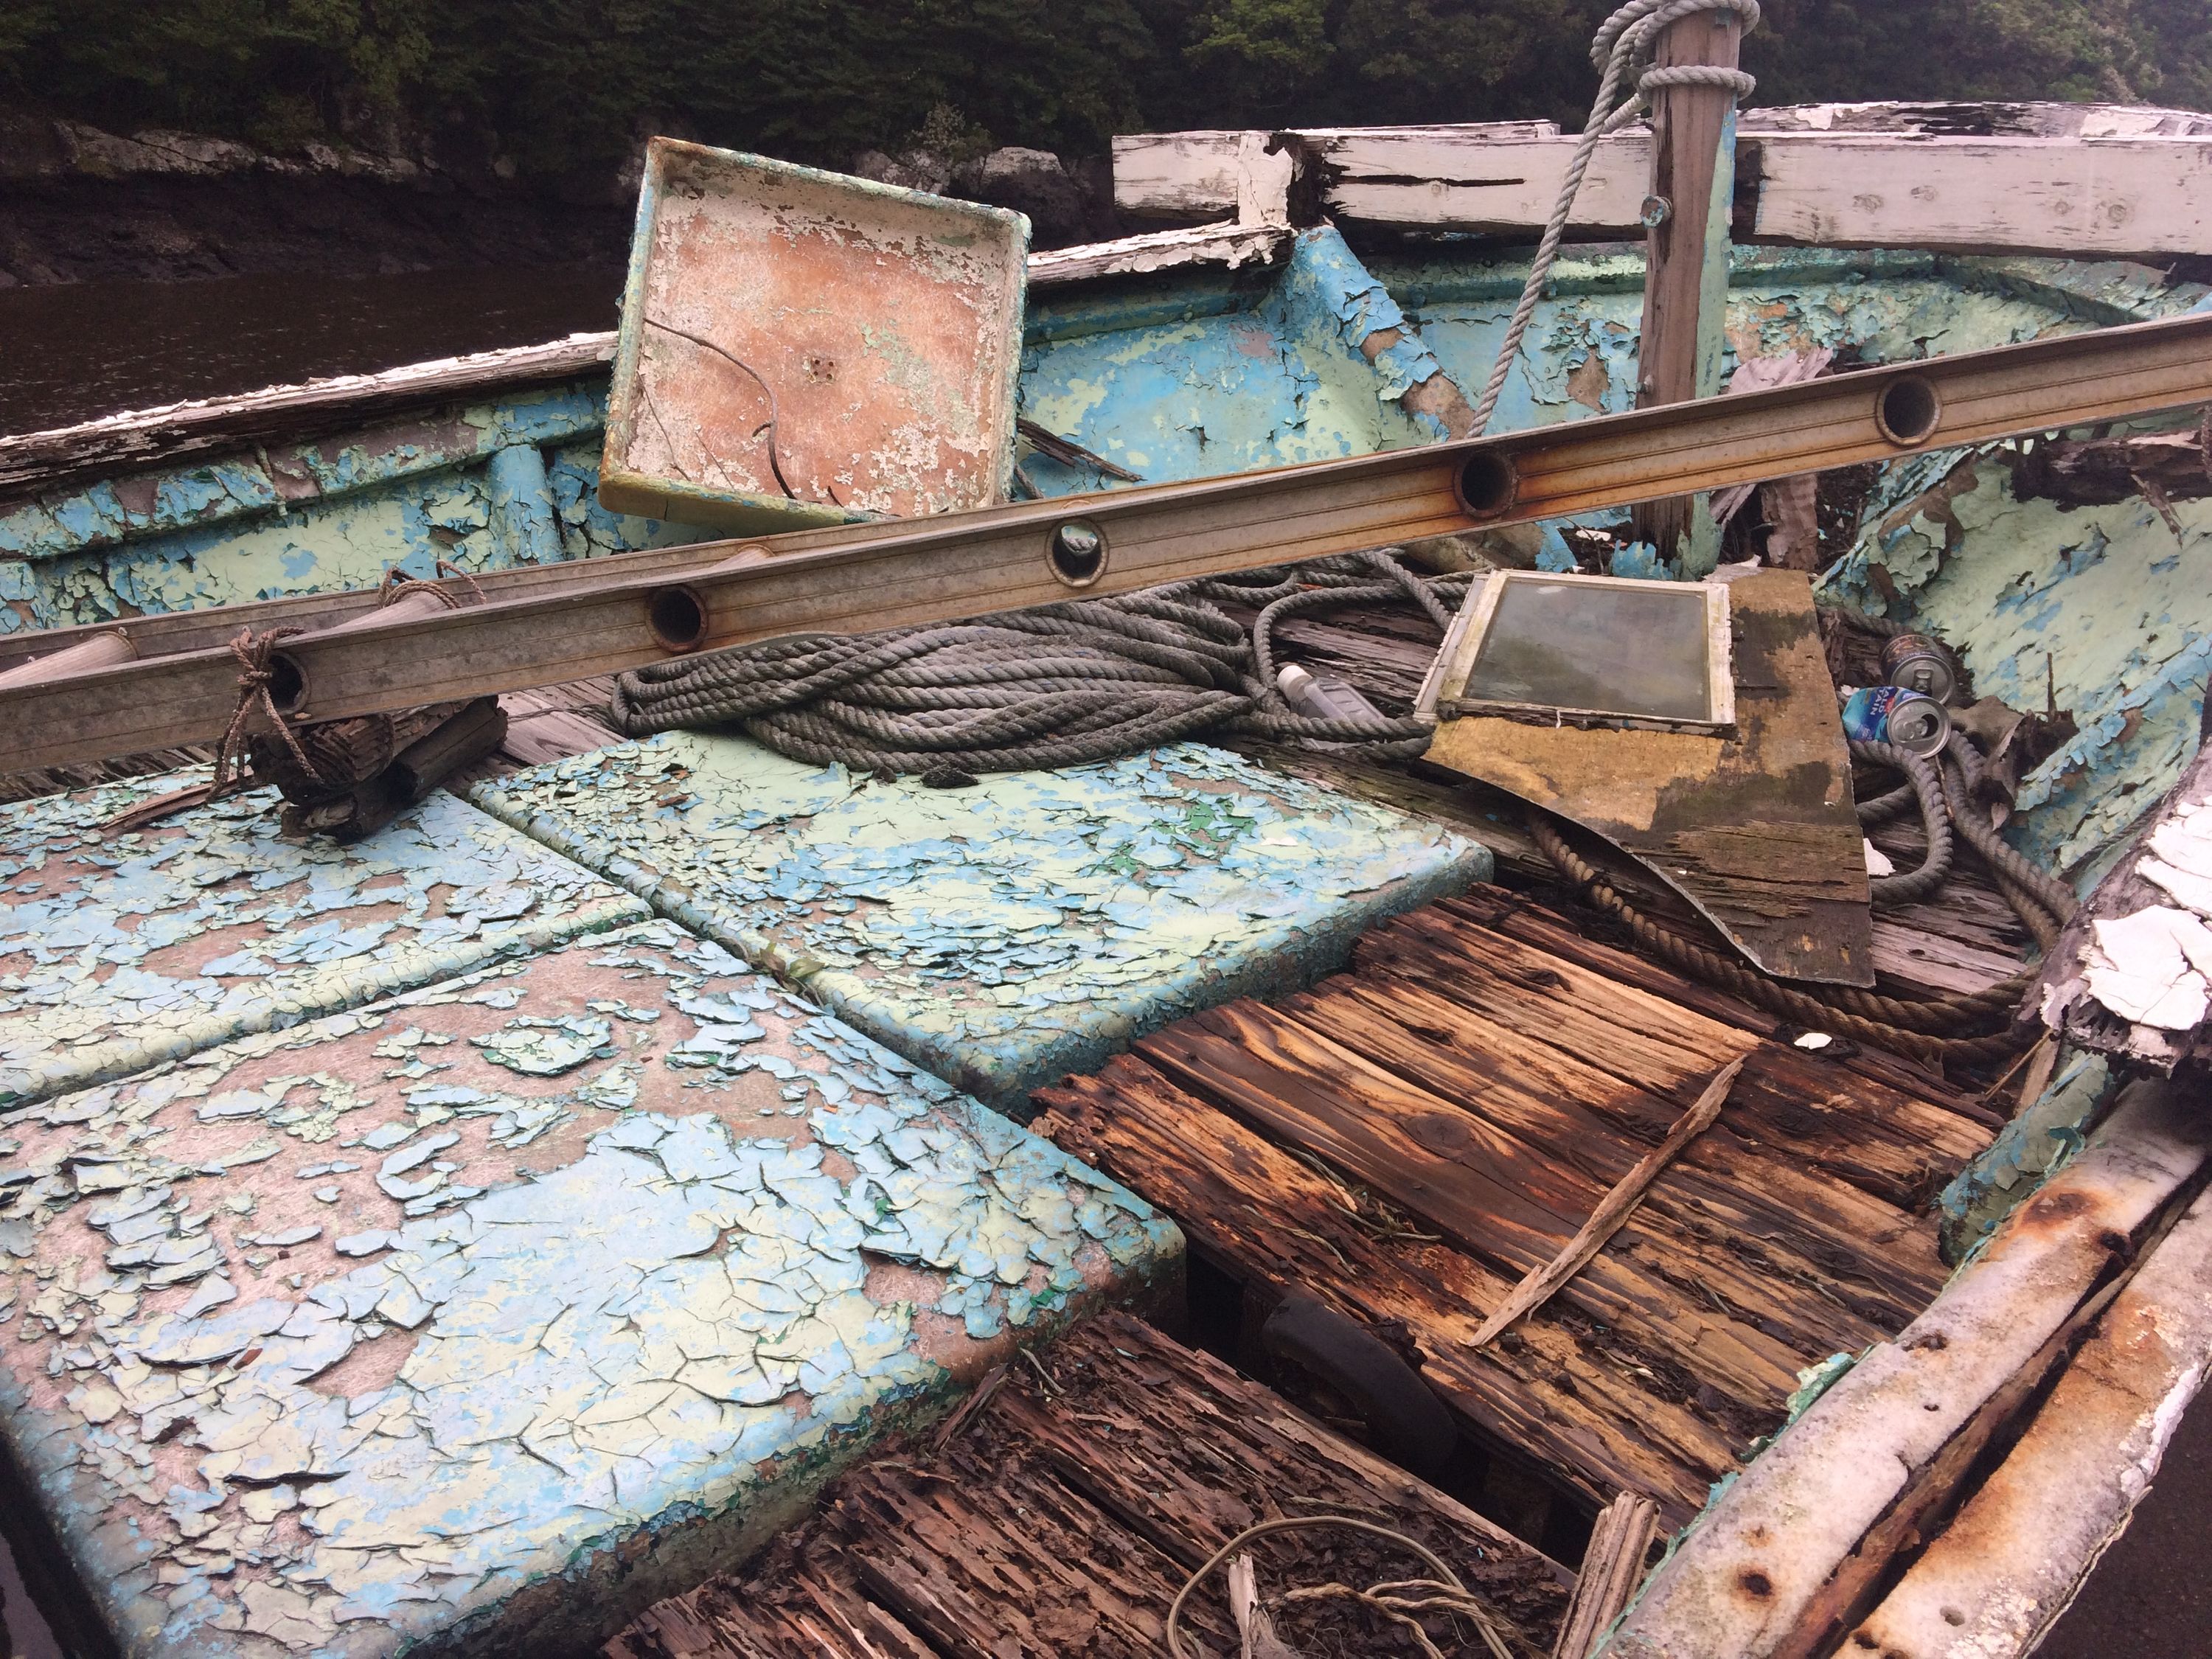 The inside of a dilapidated fishing boat.